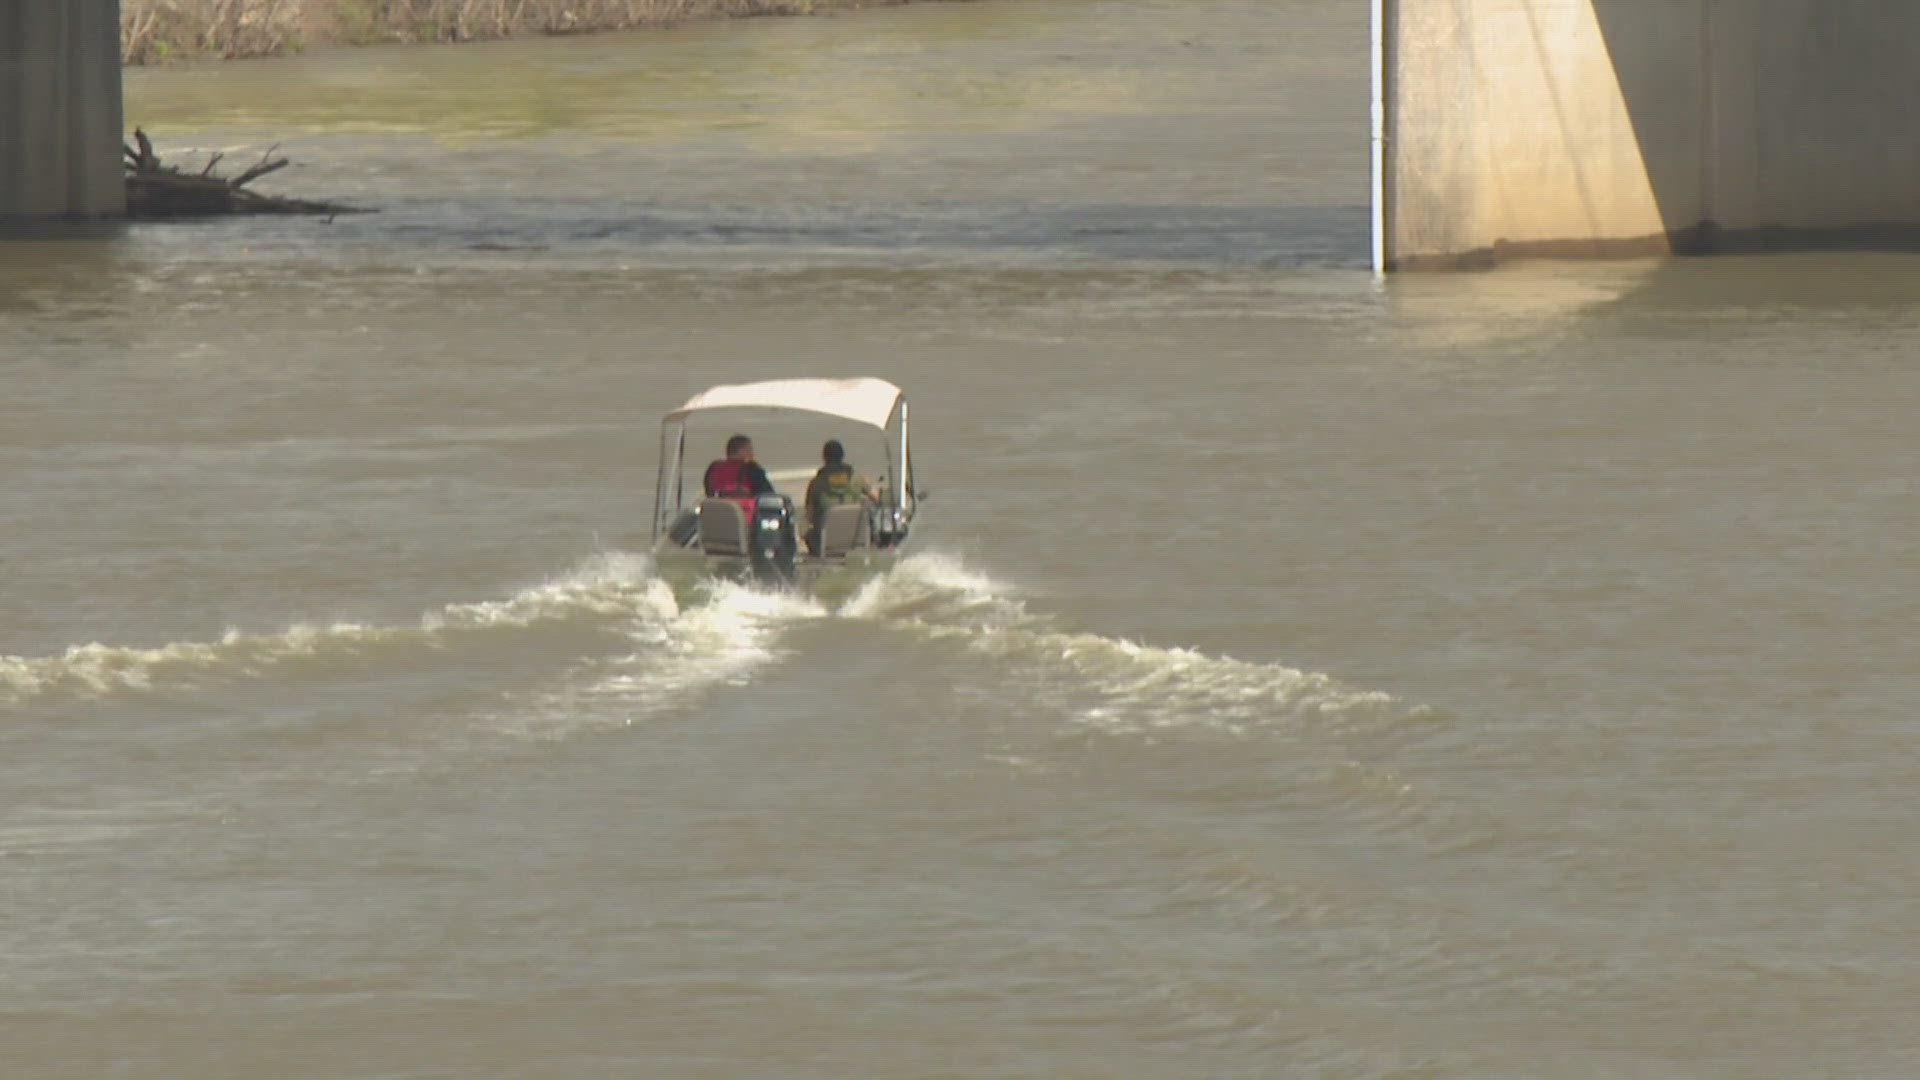 Rescue crews were called to the White River in downtown Indianapolis around 8:30 p.m. Tuesday.